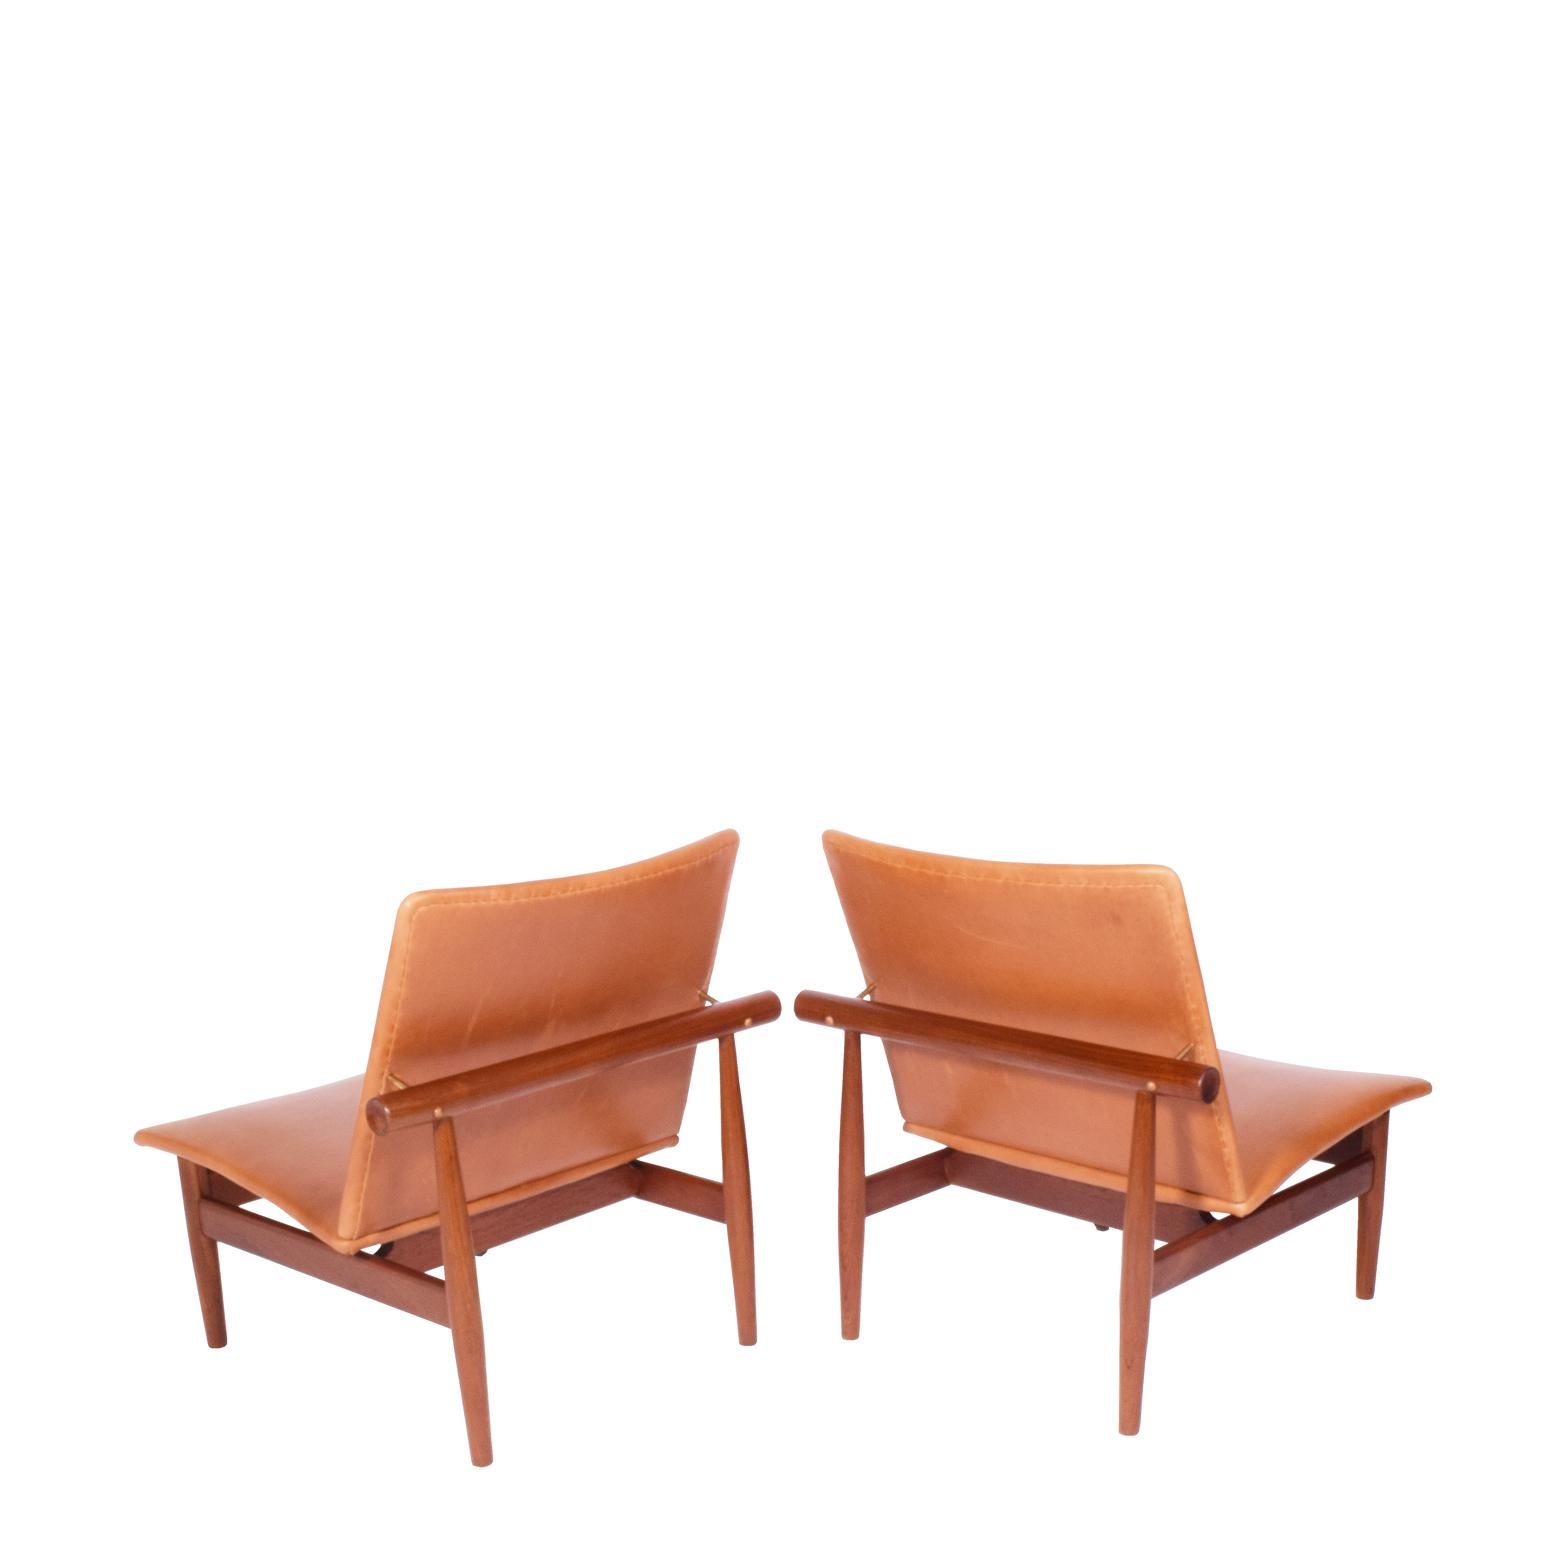 This solid teak model was designed by Finn Juhl for mass production but maintained his eye for beautiful proportions and warmth. Also made were two-seat and three seater sofas with labels. The chair was upholstered approximately 10 years ago.